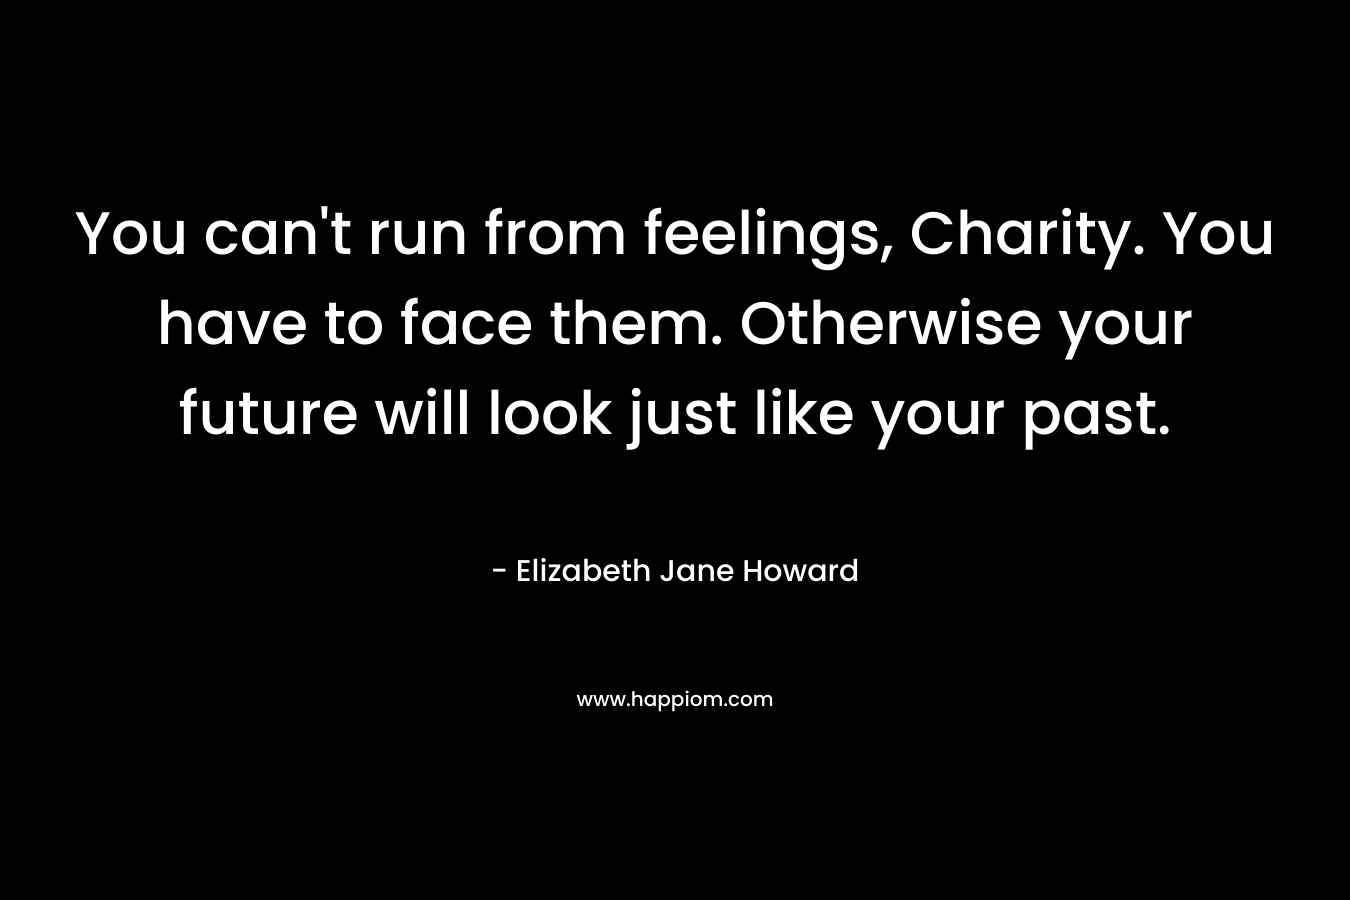 You can’t run from feelings, Charity. You have to face them. Otherwise your future will look just like your past. – Elizabeth Jane Howard